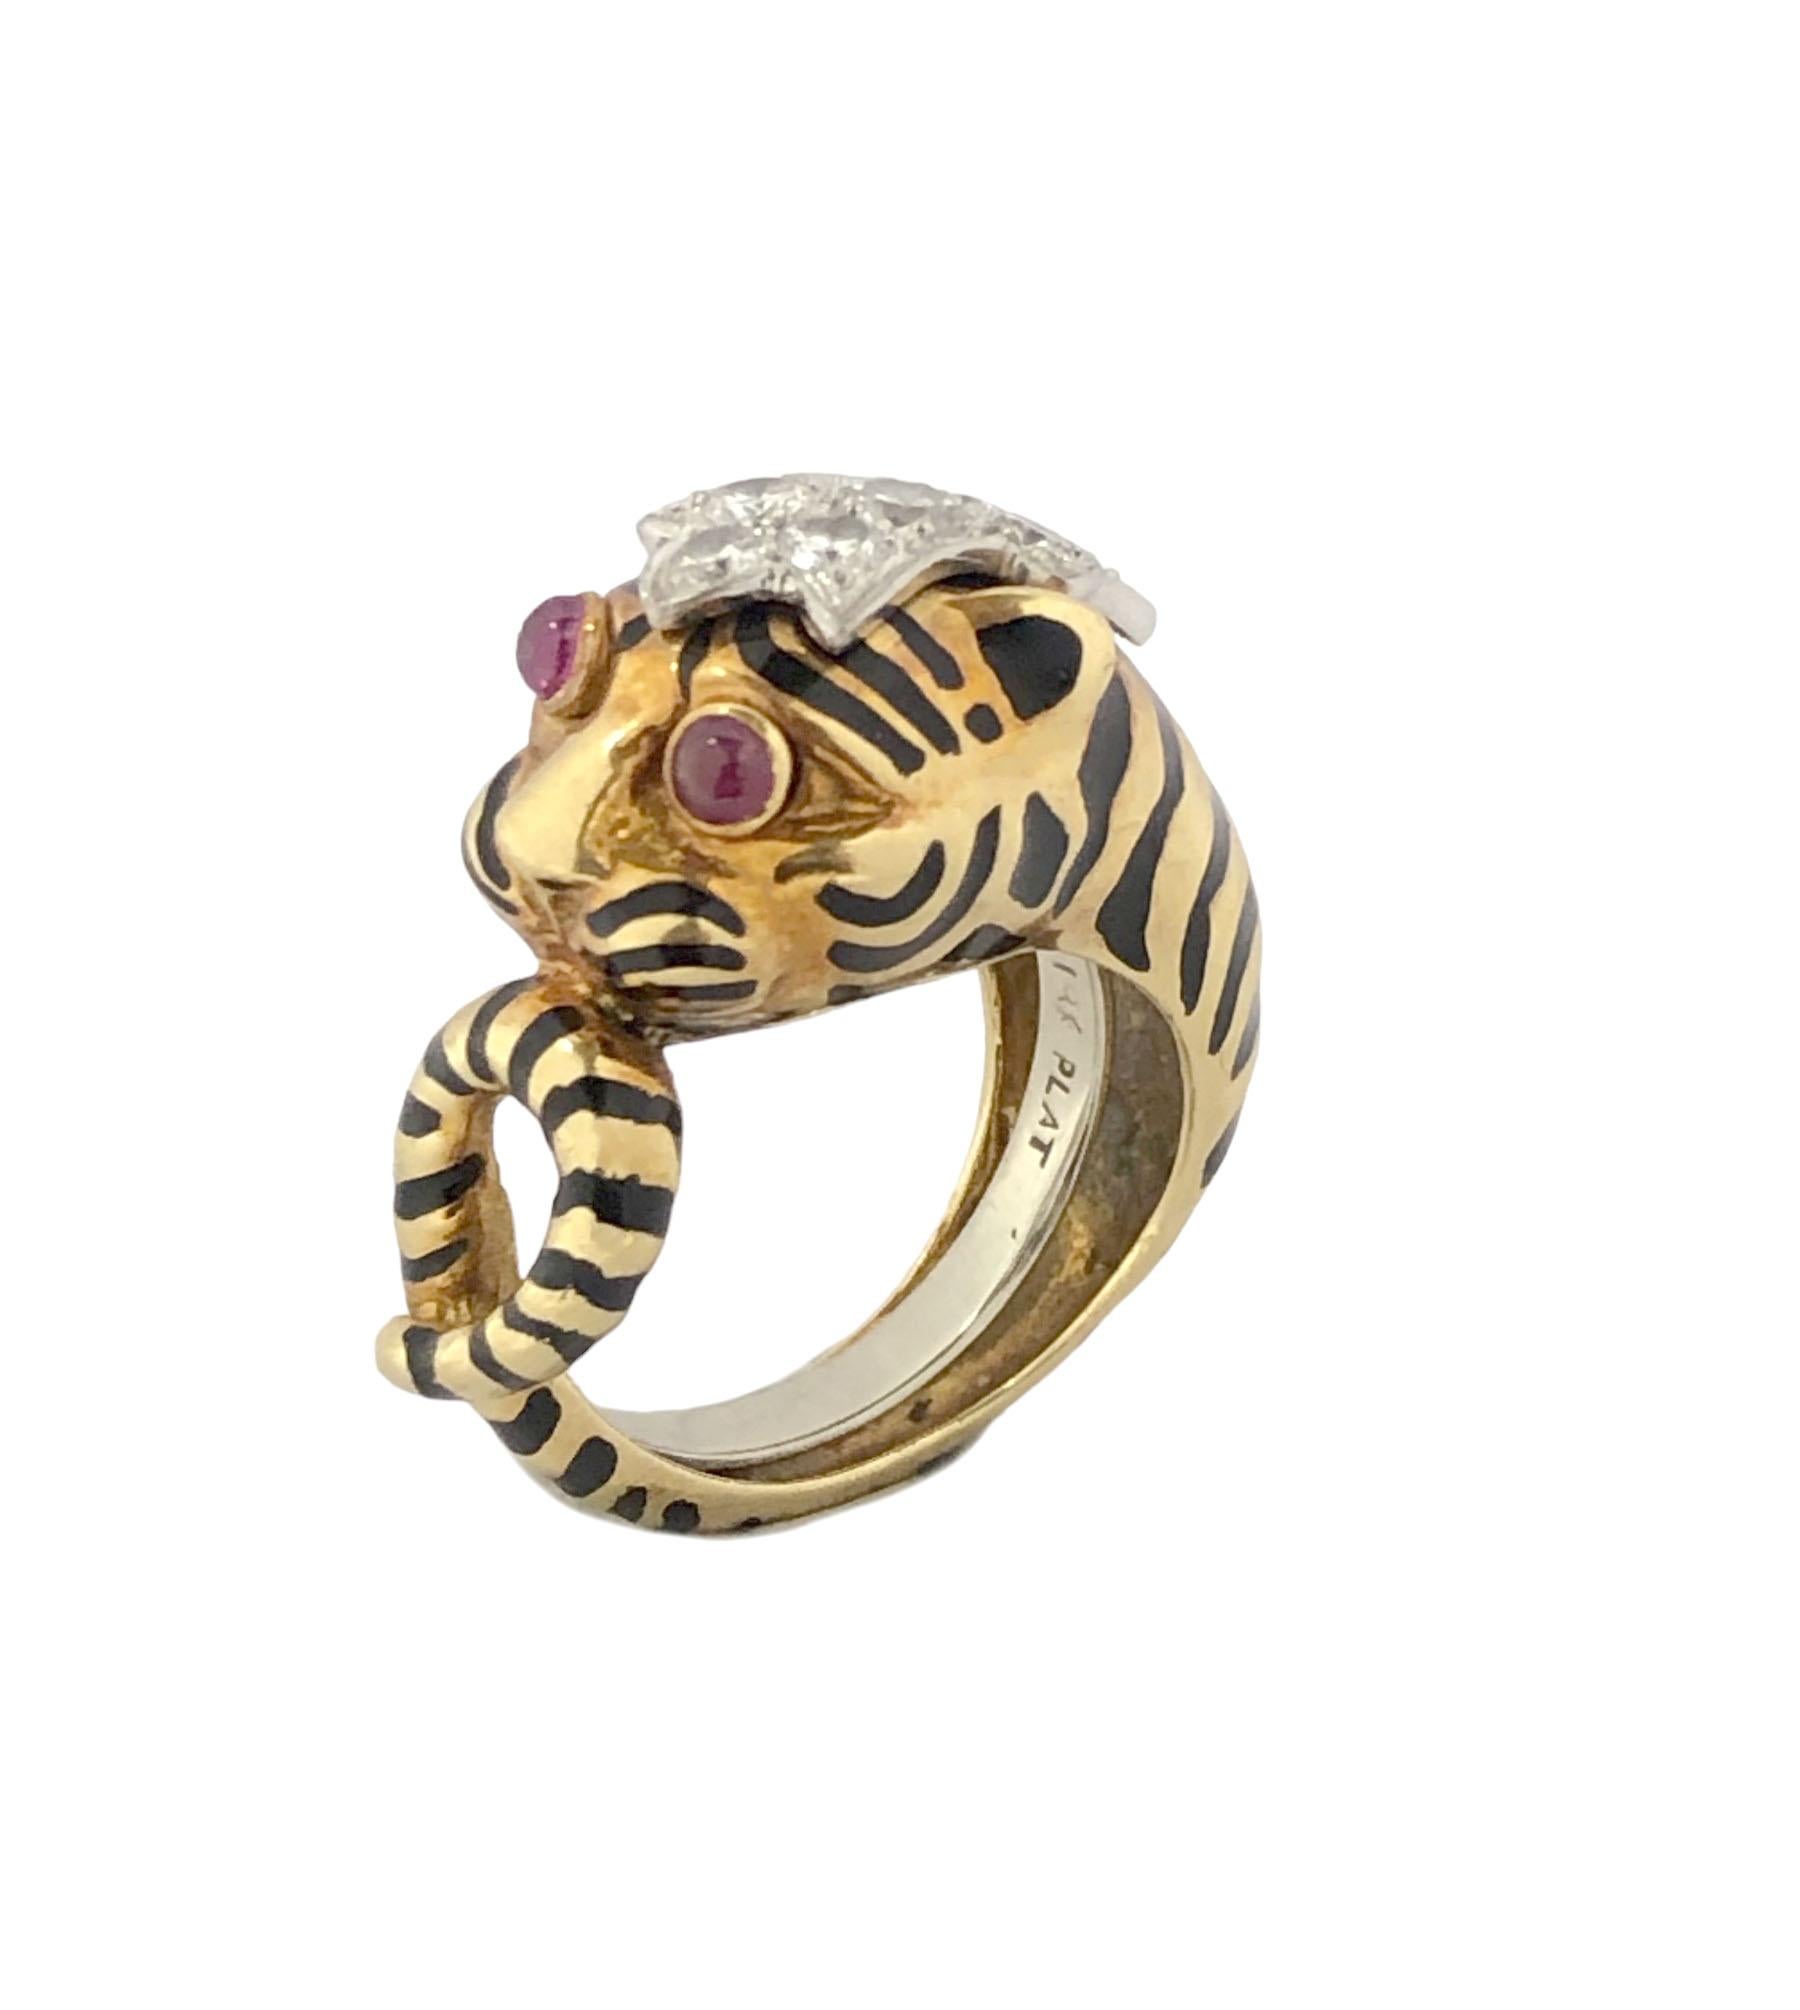 Circa 2000 David Webb 18k Yellow Gold and Platinum Tiger Ring, the top of the ring measures 7/8 x 1/2 inch, the top is set with numerous Round Brilliant cut Diamonds totaling approximately .40 Carat, Cabochon Ruby Eyes and iconic David Webb Detailed